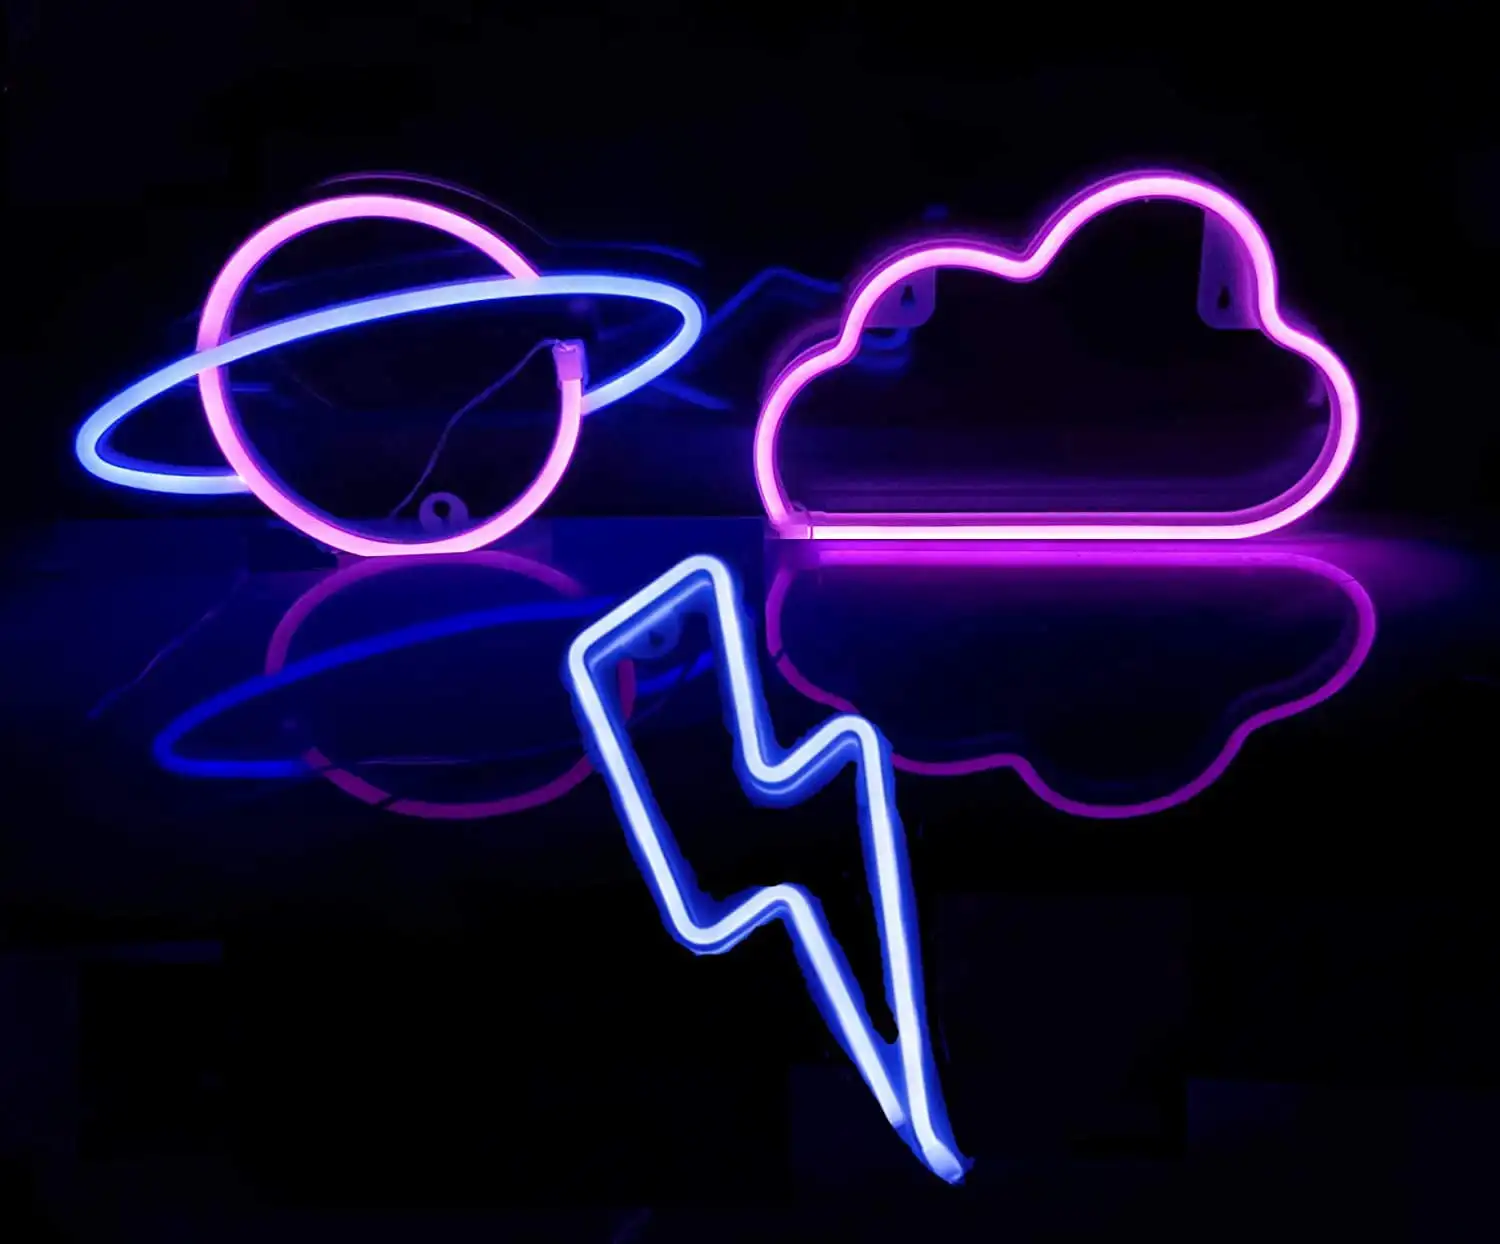 

Free Shipping 3 Pcs Neon Signs,LED Neon Light Signs for Wall Decoration,LED Cloud Lightning Planet Neon Lights for Bedroom,Party